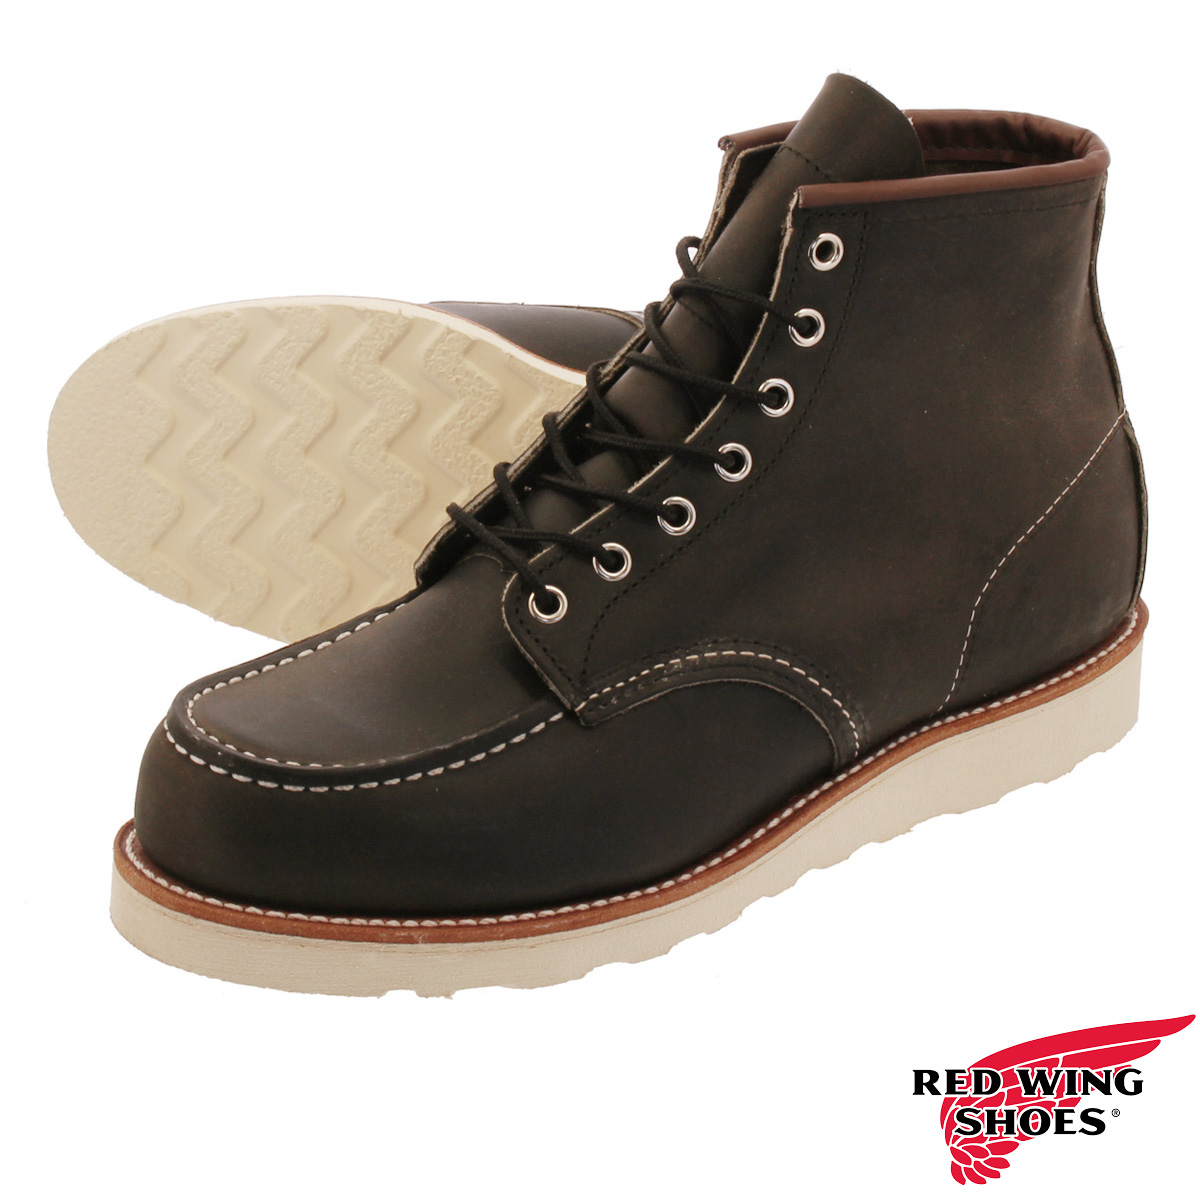 red wing 8890 charcoal